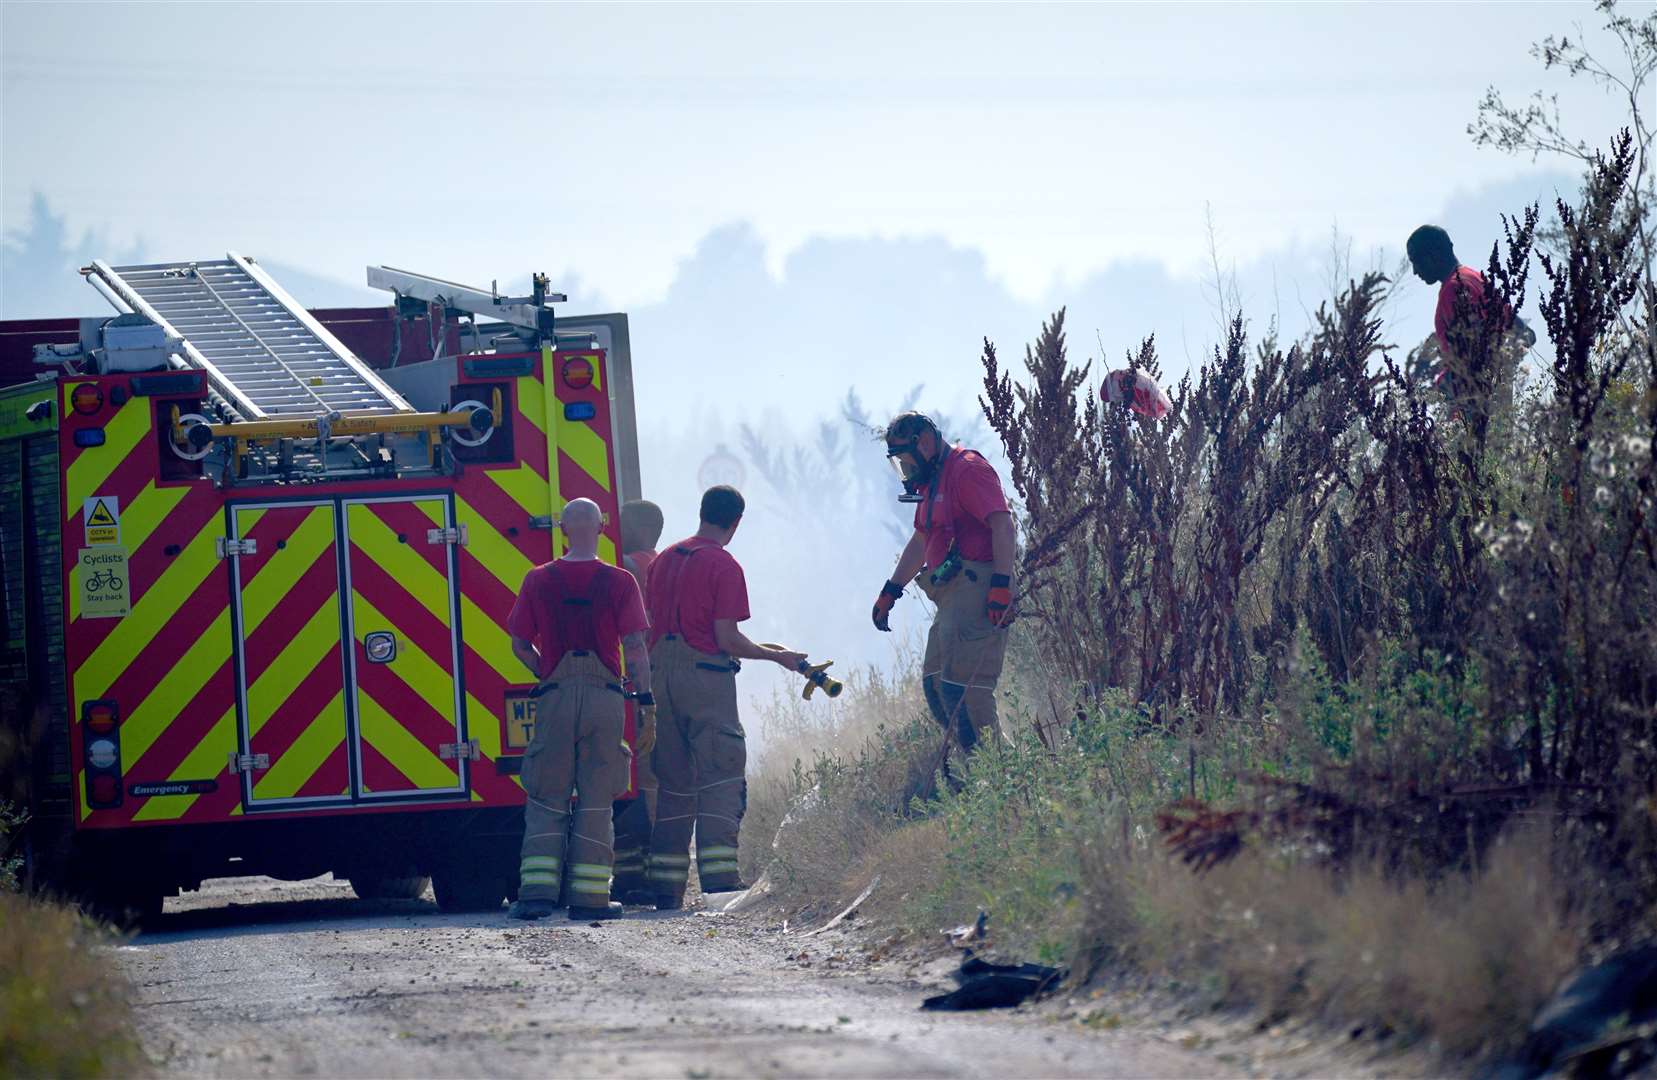 Firefighters tackle a blaze in the village of Wennington (Yui Mok/PA)